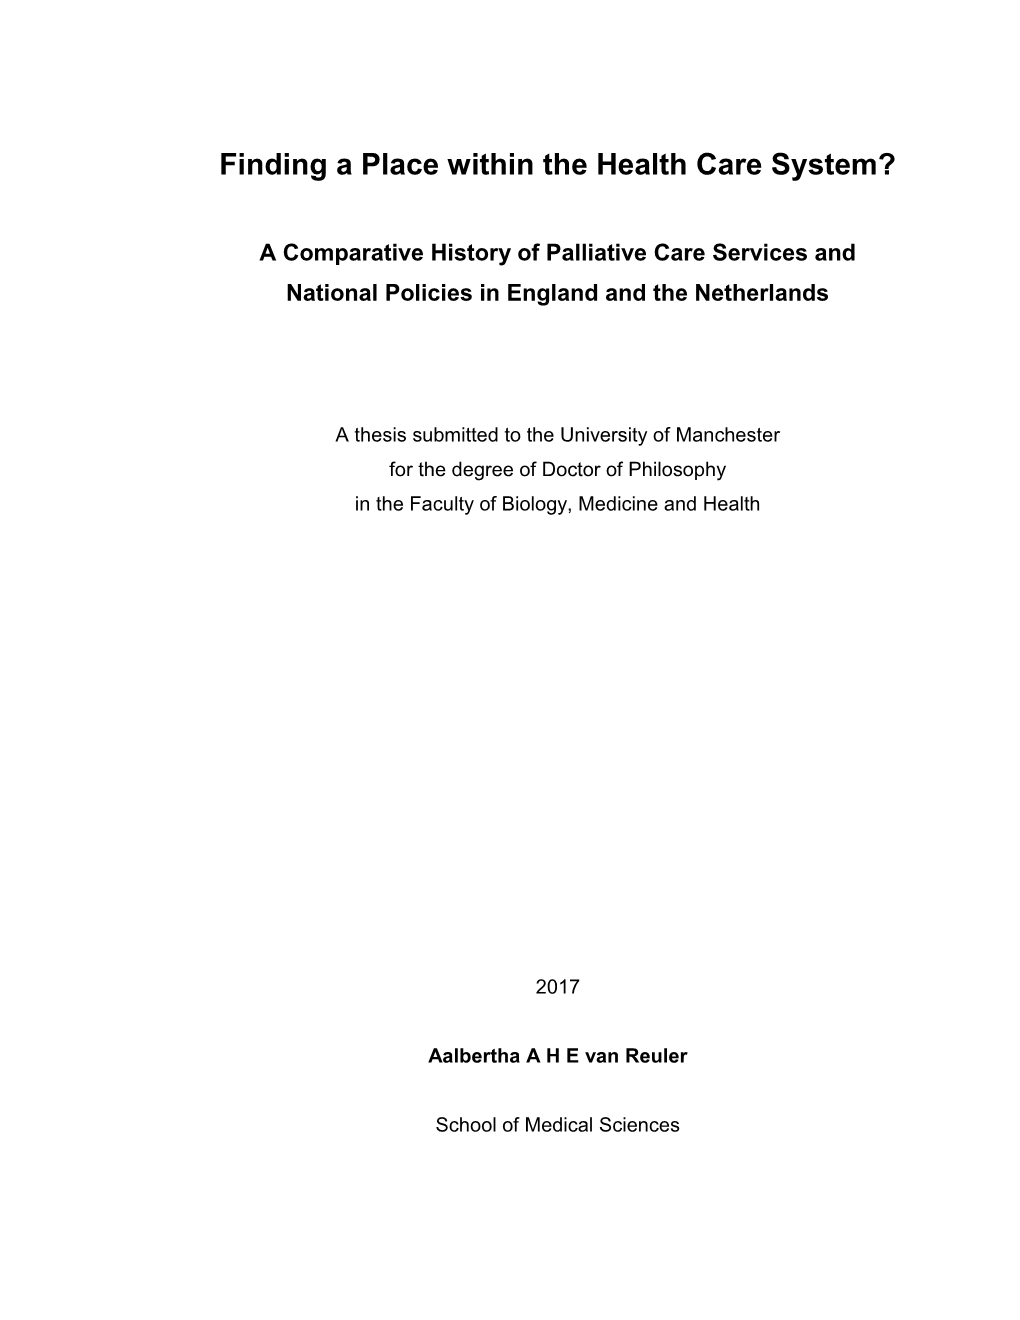 Finding a Place Within the Health Care System? a Comparative History of Palliative Care Services and National Policies in England and the Netherlands